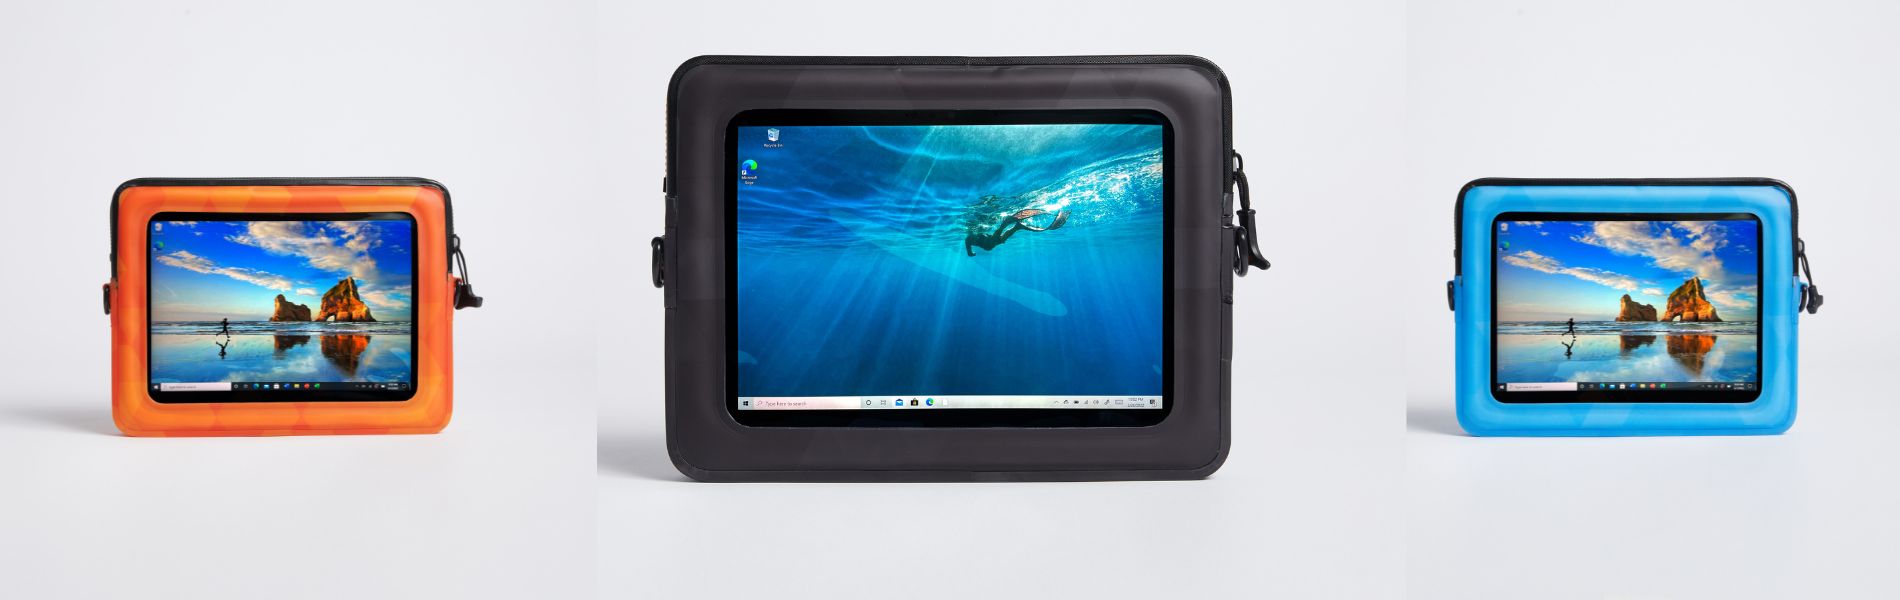 Microsoft Designed for Surface - ugo - Waterproof Cases